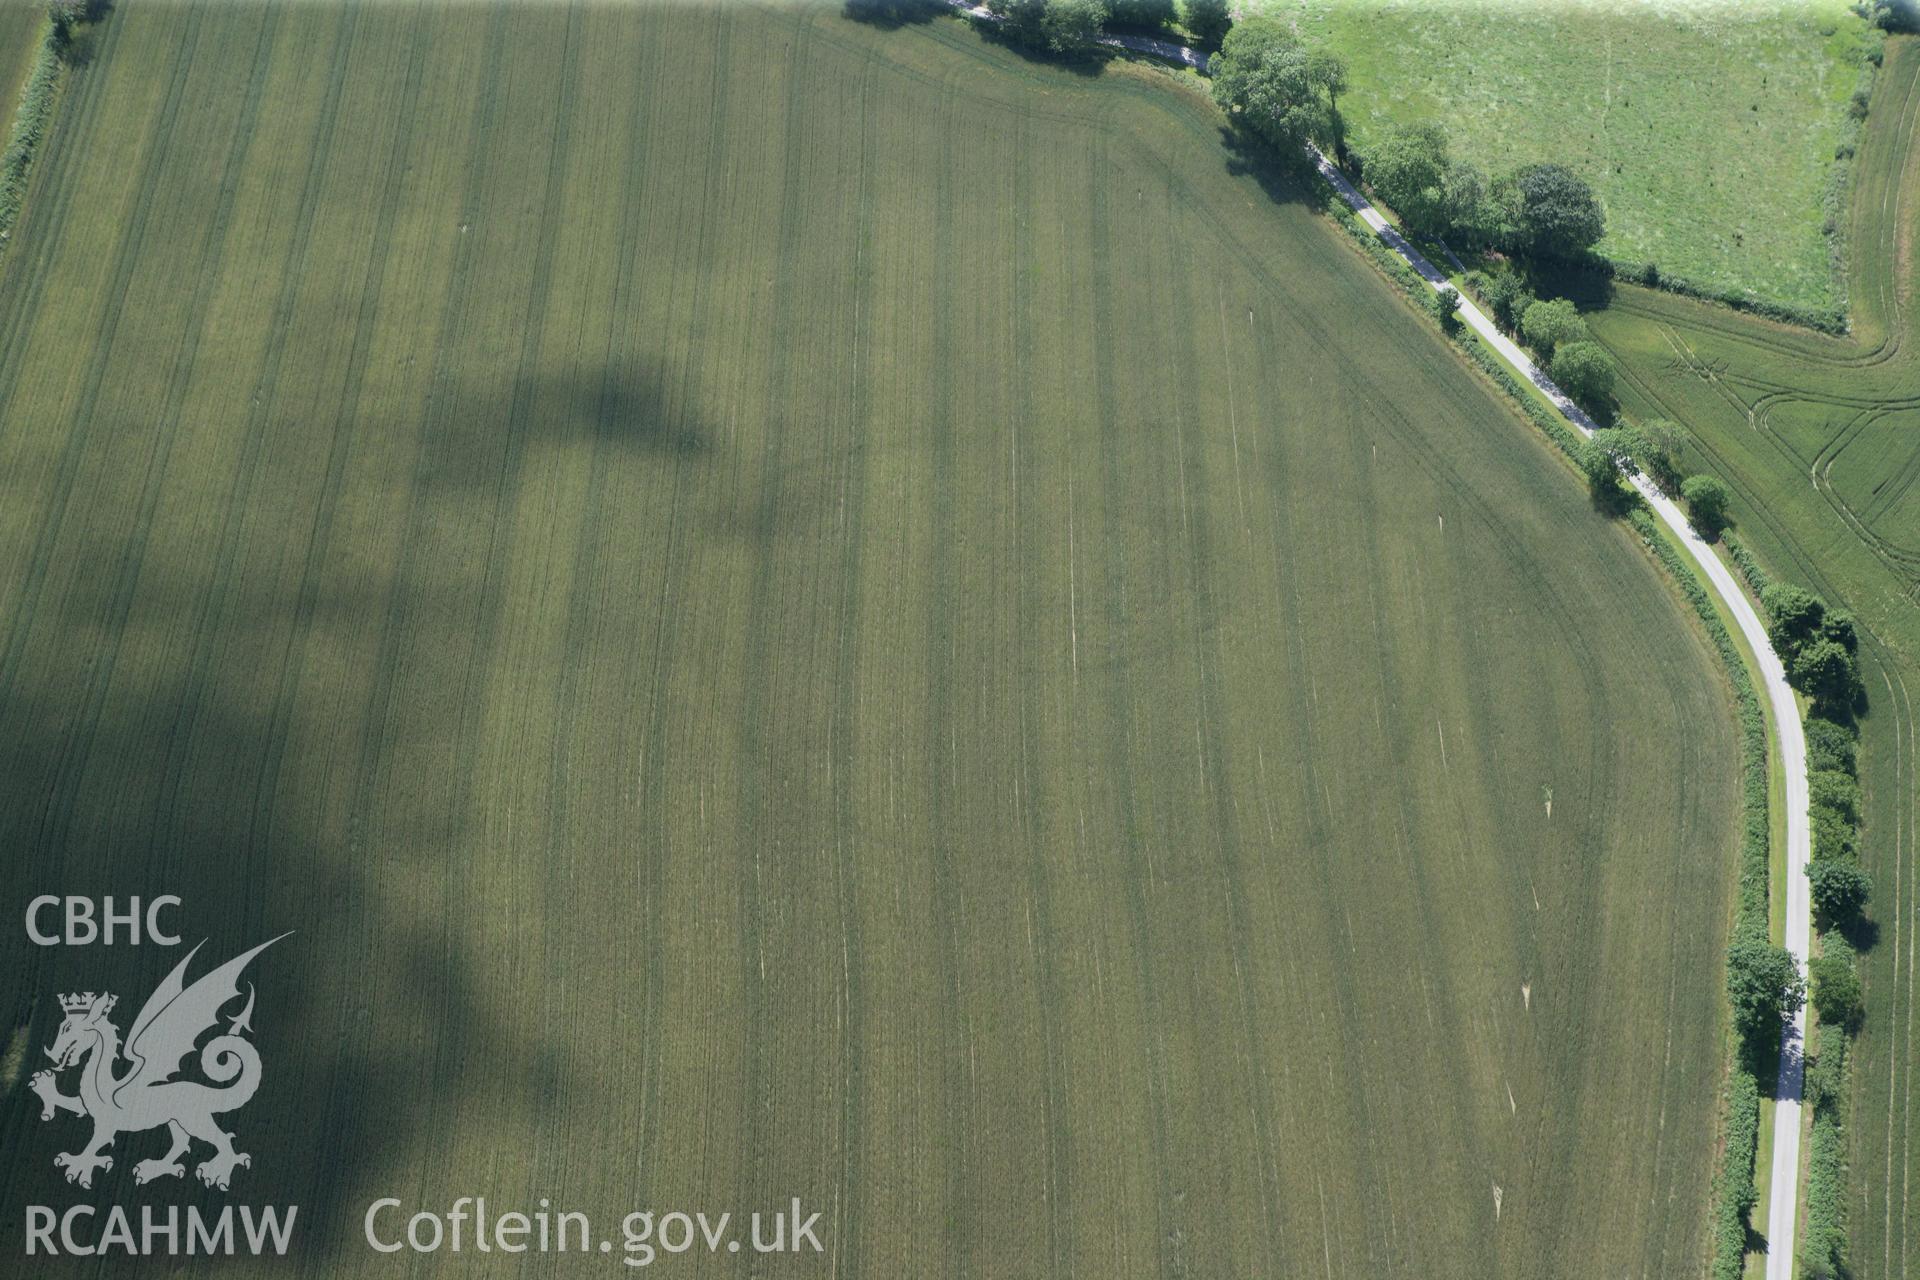 RCAHMW colour oblique photograph of Cawrence Cropmark Enclosure. Taken by Toby Driver and Oliver Davies on 28/06/2011.